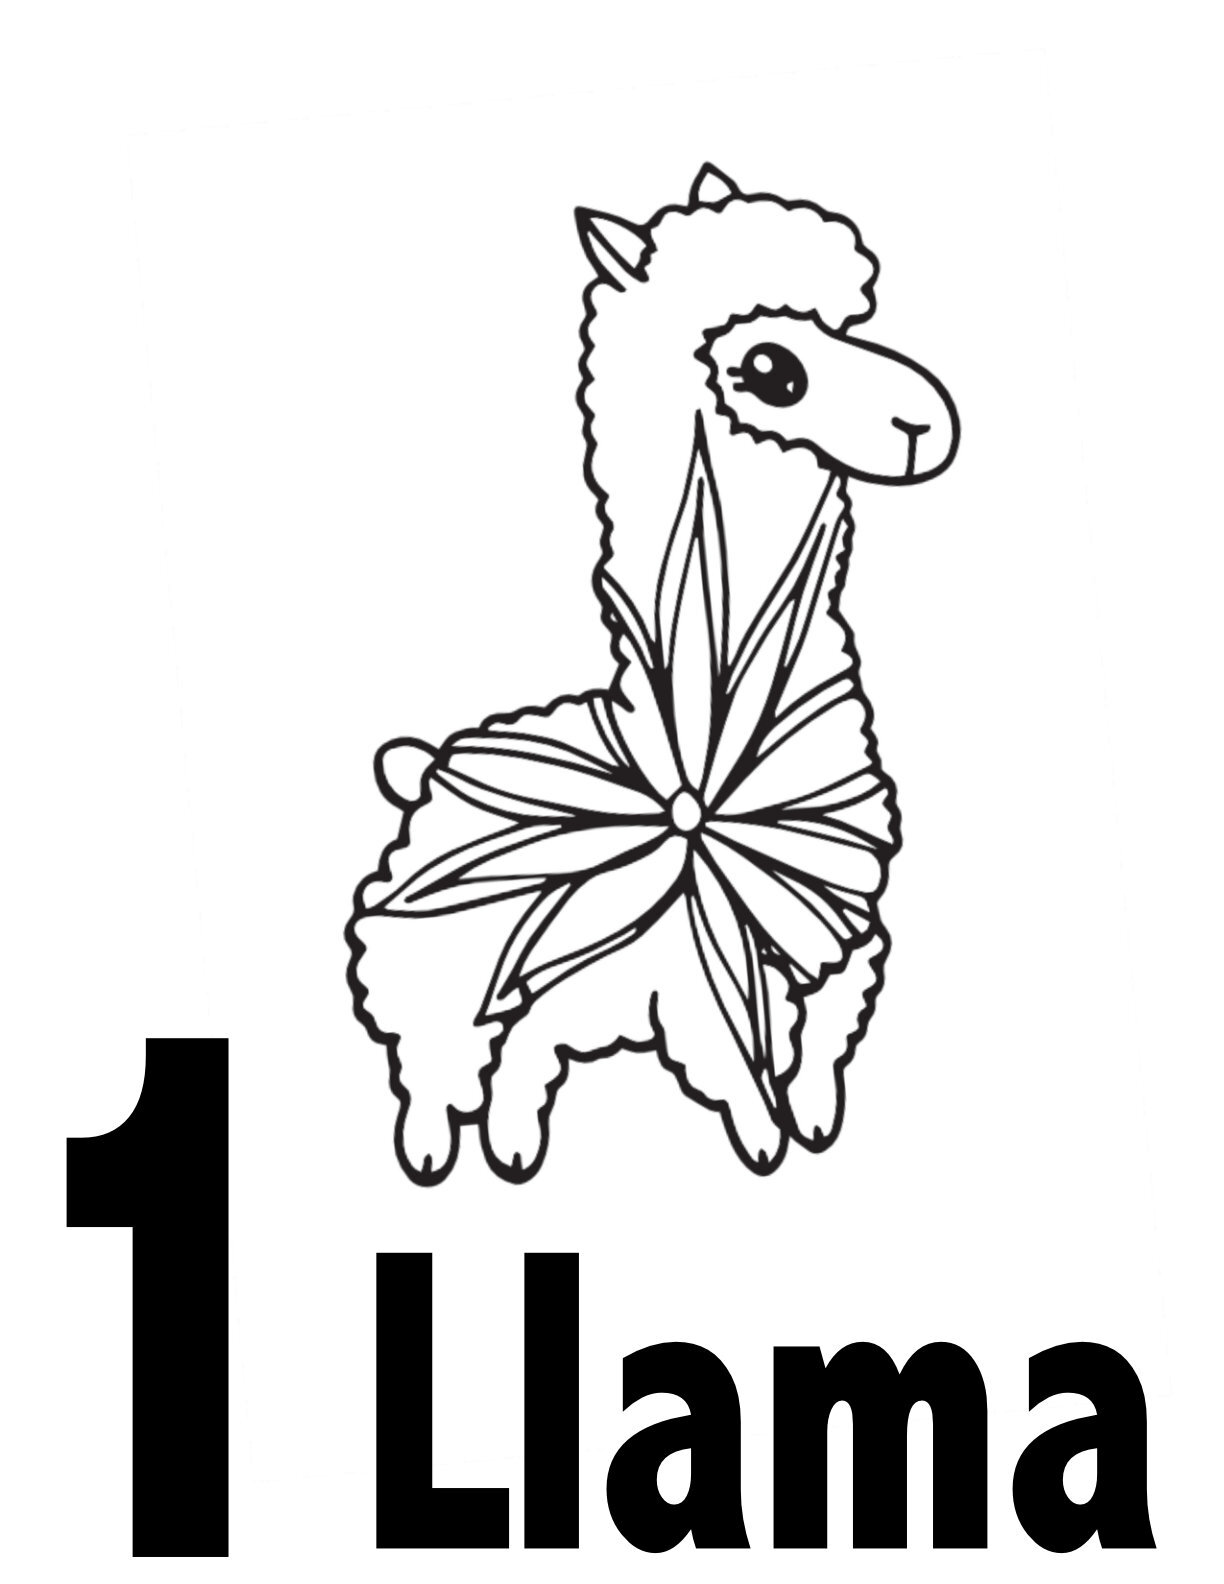 Llama Number Coloring Pages Collection 1-10 - Free Preschool/Kindergarten Printable - Number 1CLICK TO DOWNLOAD THE 1 LLAMA PAGE ONLY